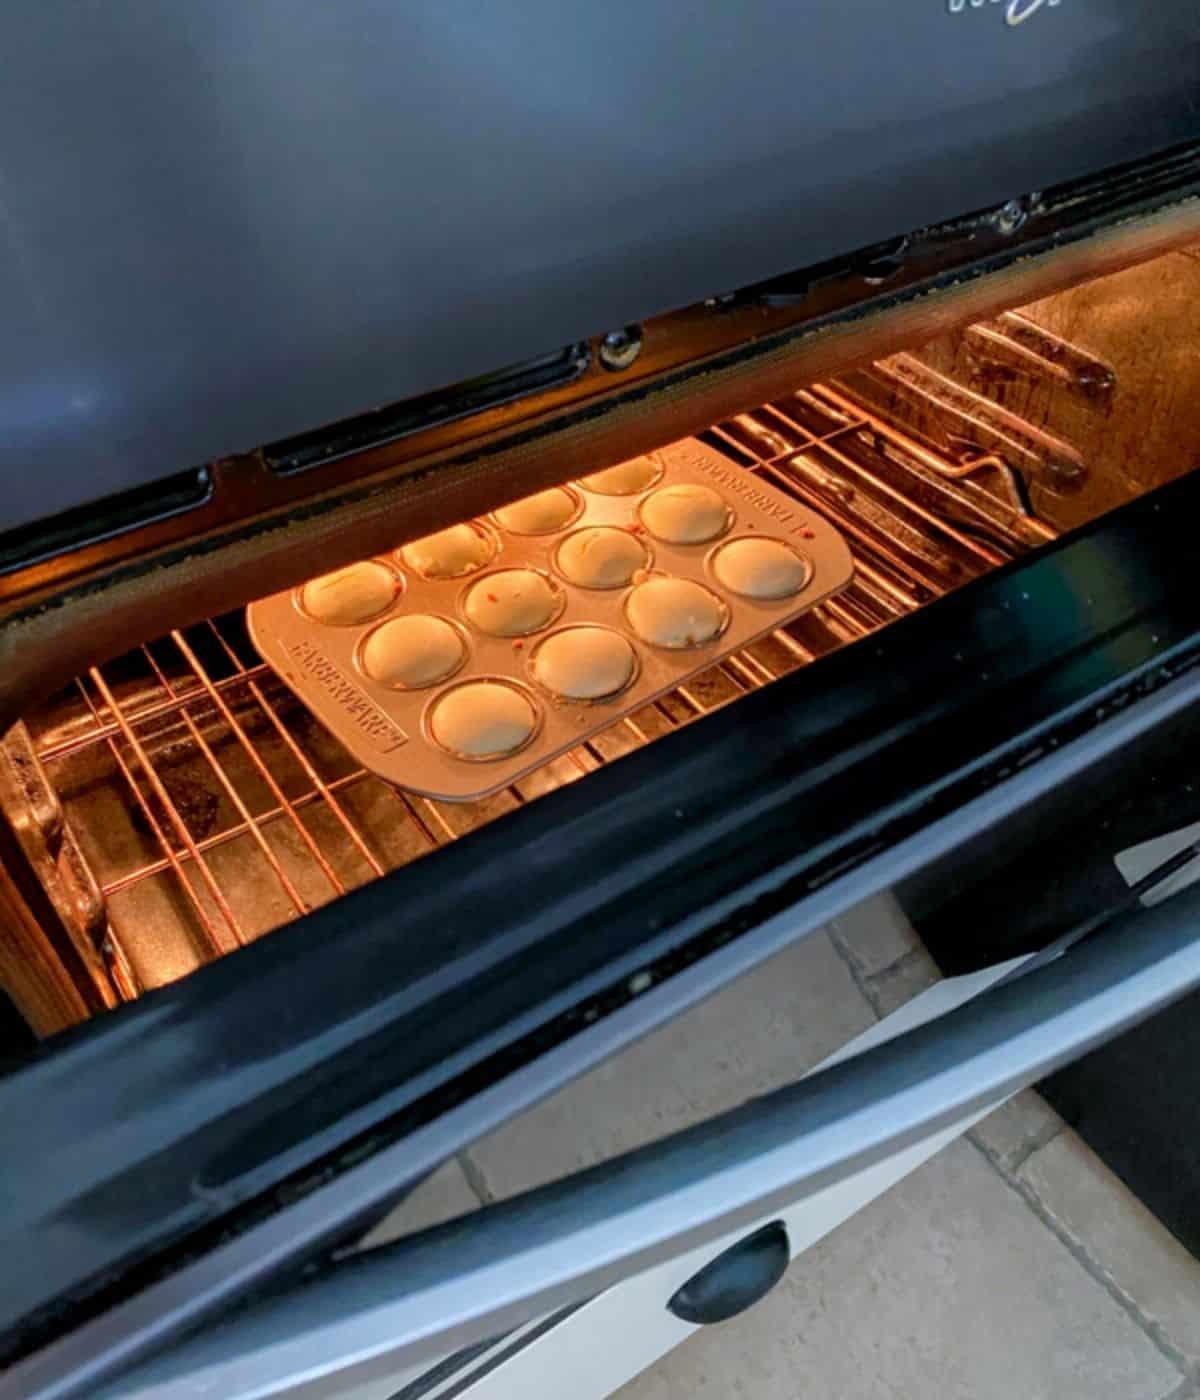 oven cracked open with mini cheesecakes inside.